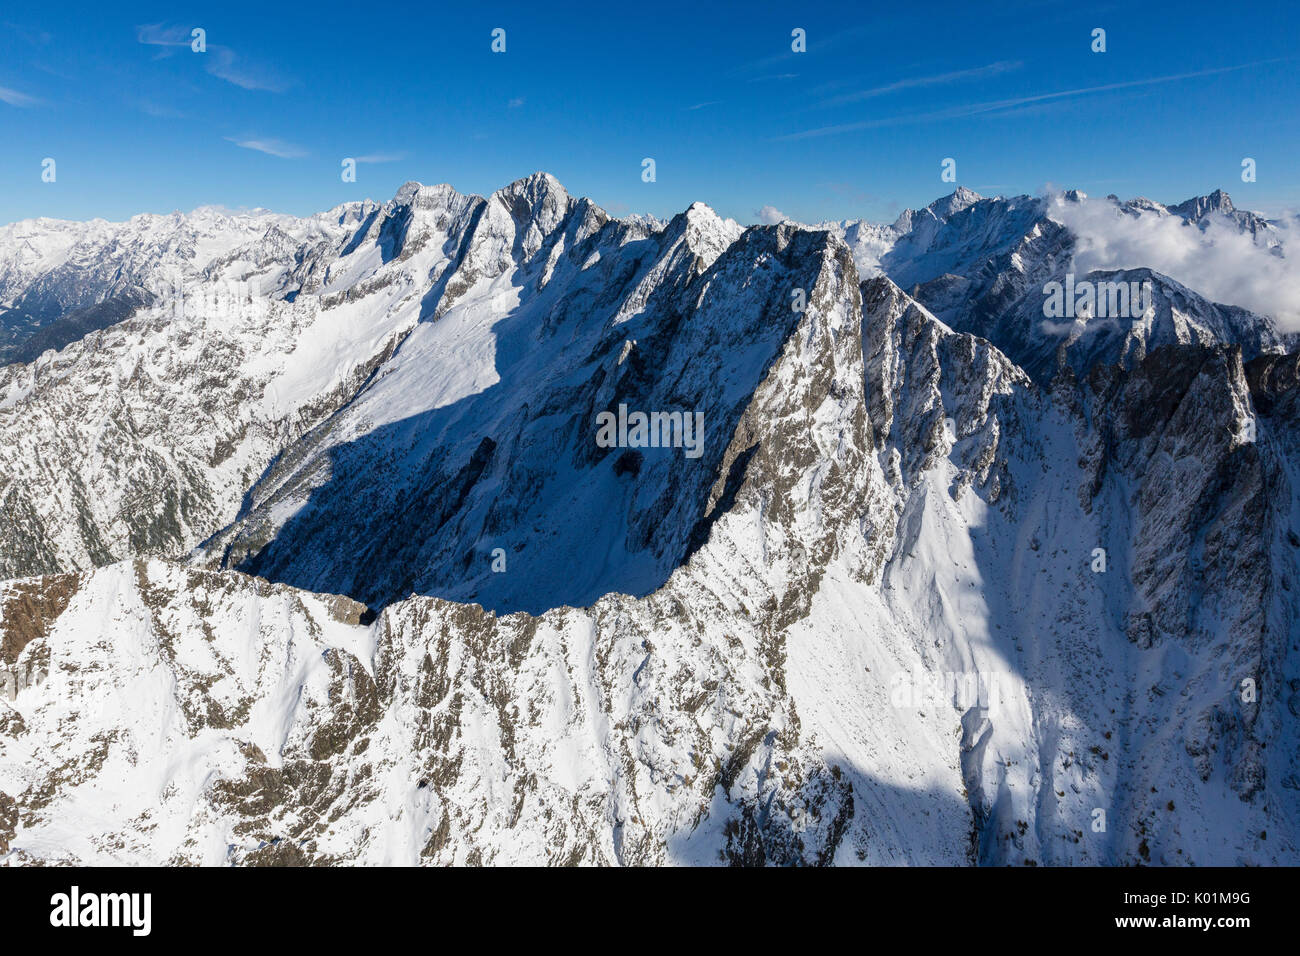 Aerial view of the snowy peaks and ridges in a sunny day of autumn Chiavenna Valley Valtellina Lombardy Italy Europe Stock Photo